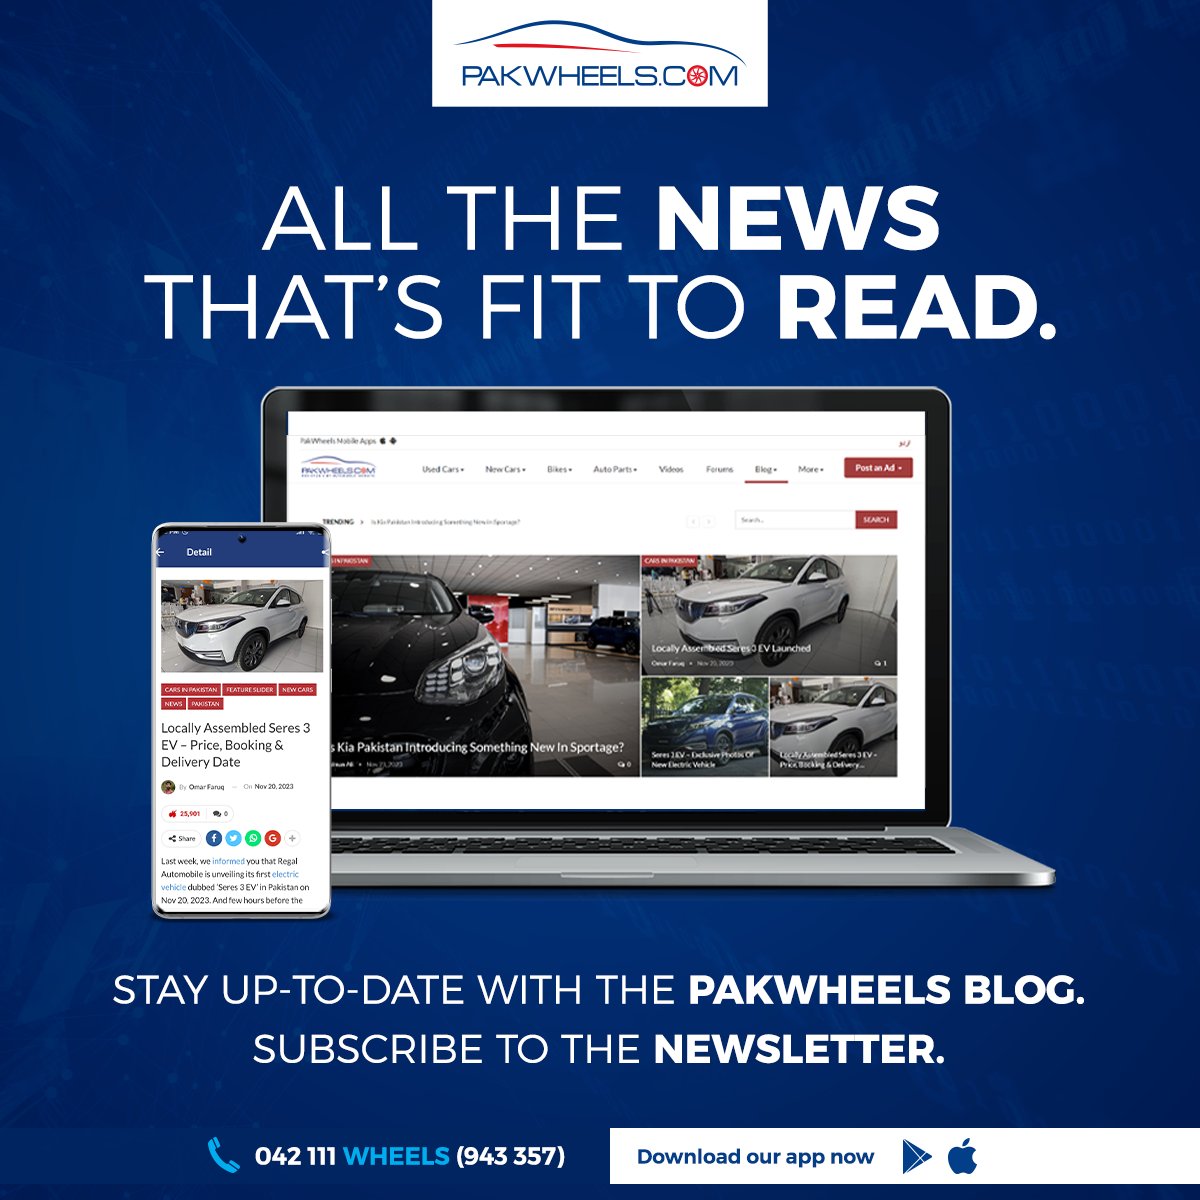 Don't miss out on the latest news and reviews from the world of Automobiles. Subscribe to the PakWheels Newsletter now!

Visit the blog section: ow.ly/mt1550QaIki

#PWBlogs #PakWheels #Newsletter #Blogs